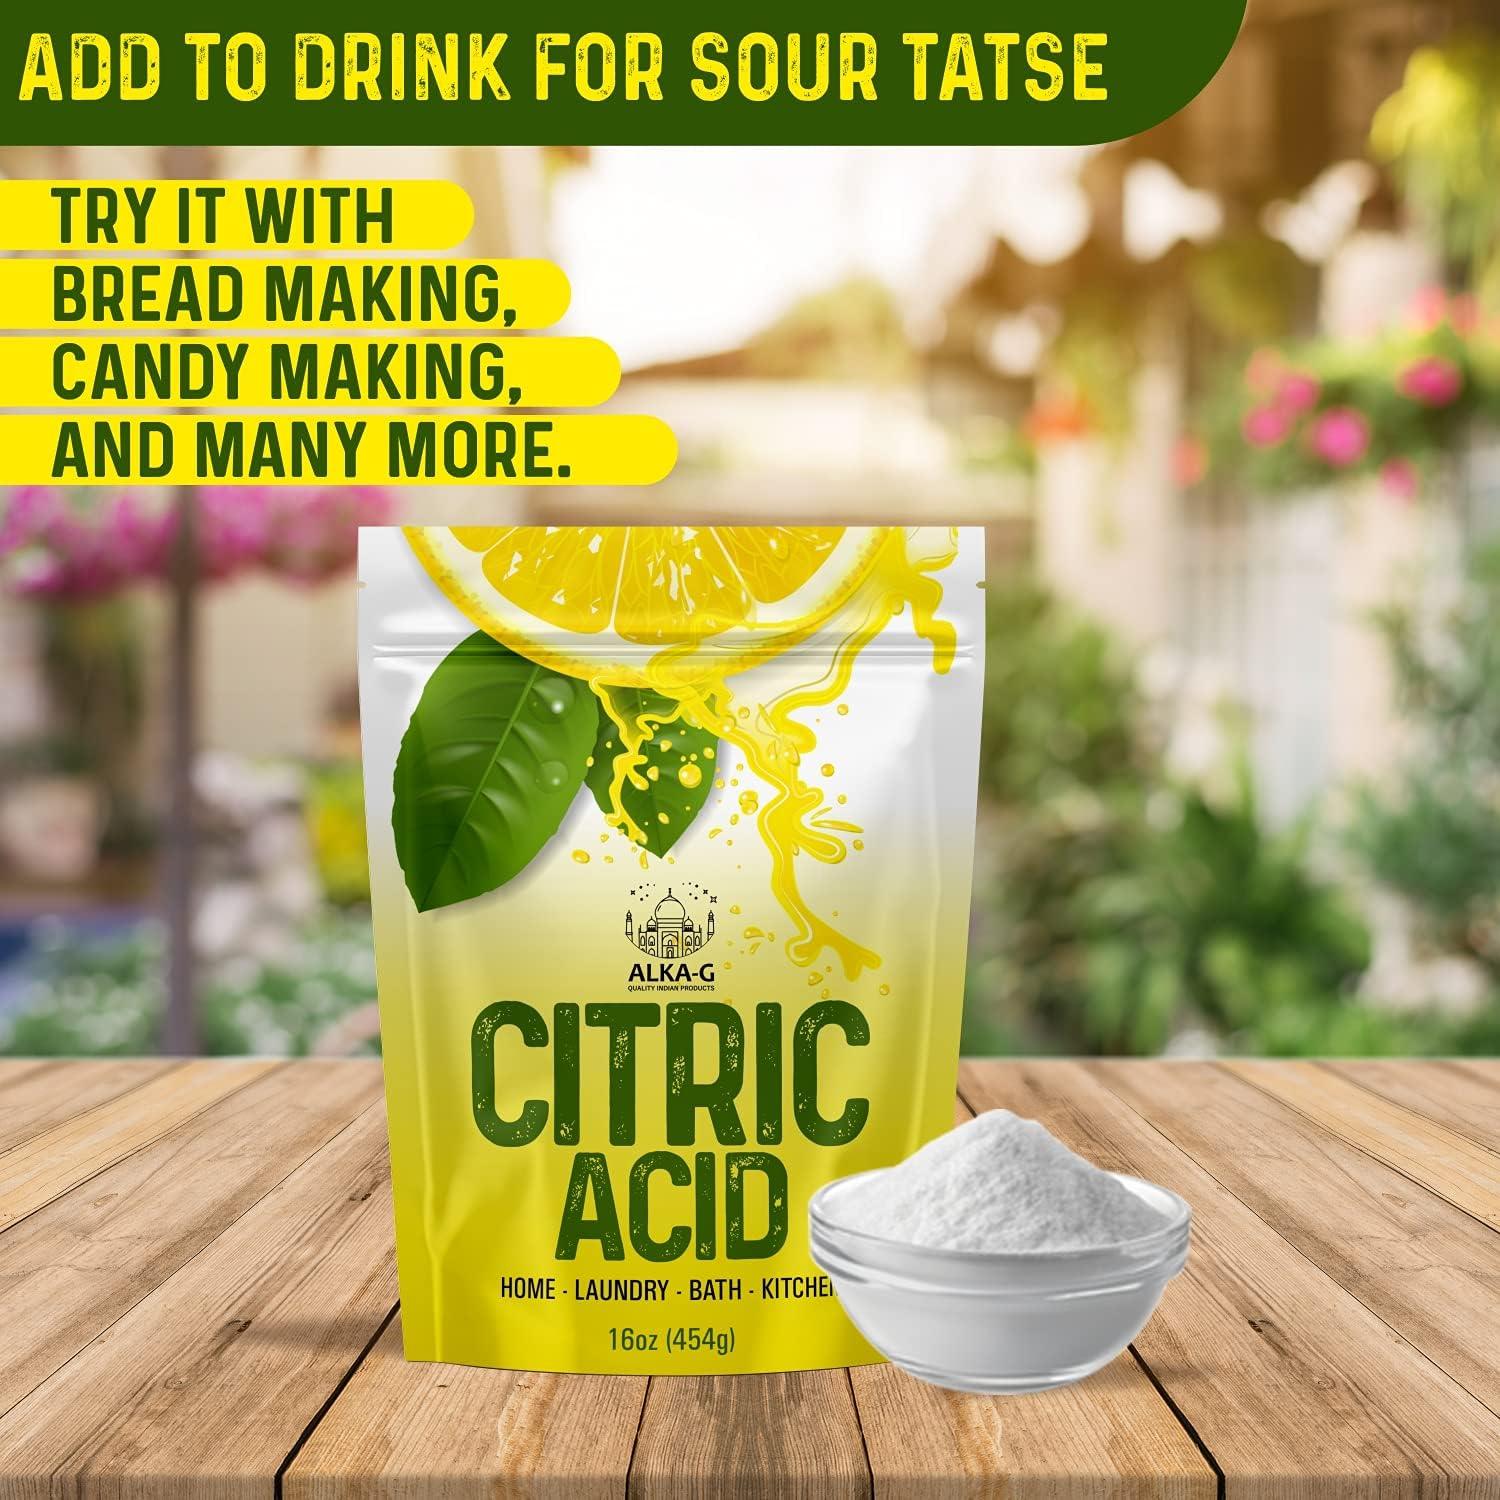  Citric Acid 6 Pounds, Food Grade, Fine Granular Powder, 100%  Pure, Concentrated Anhydrous Form, Natural Preservative + Great for  Cooking, Cleaning, & DIY Bath Bombs